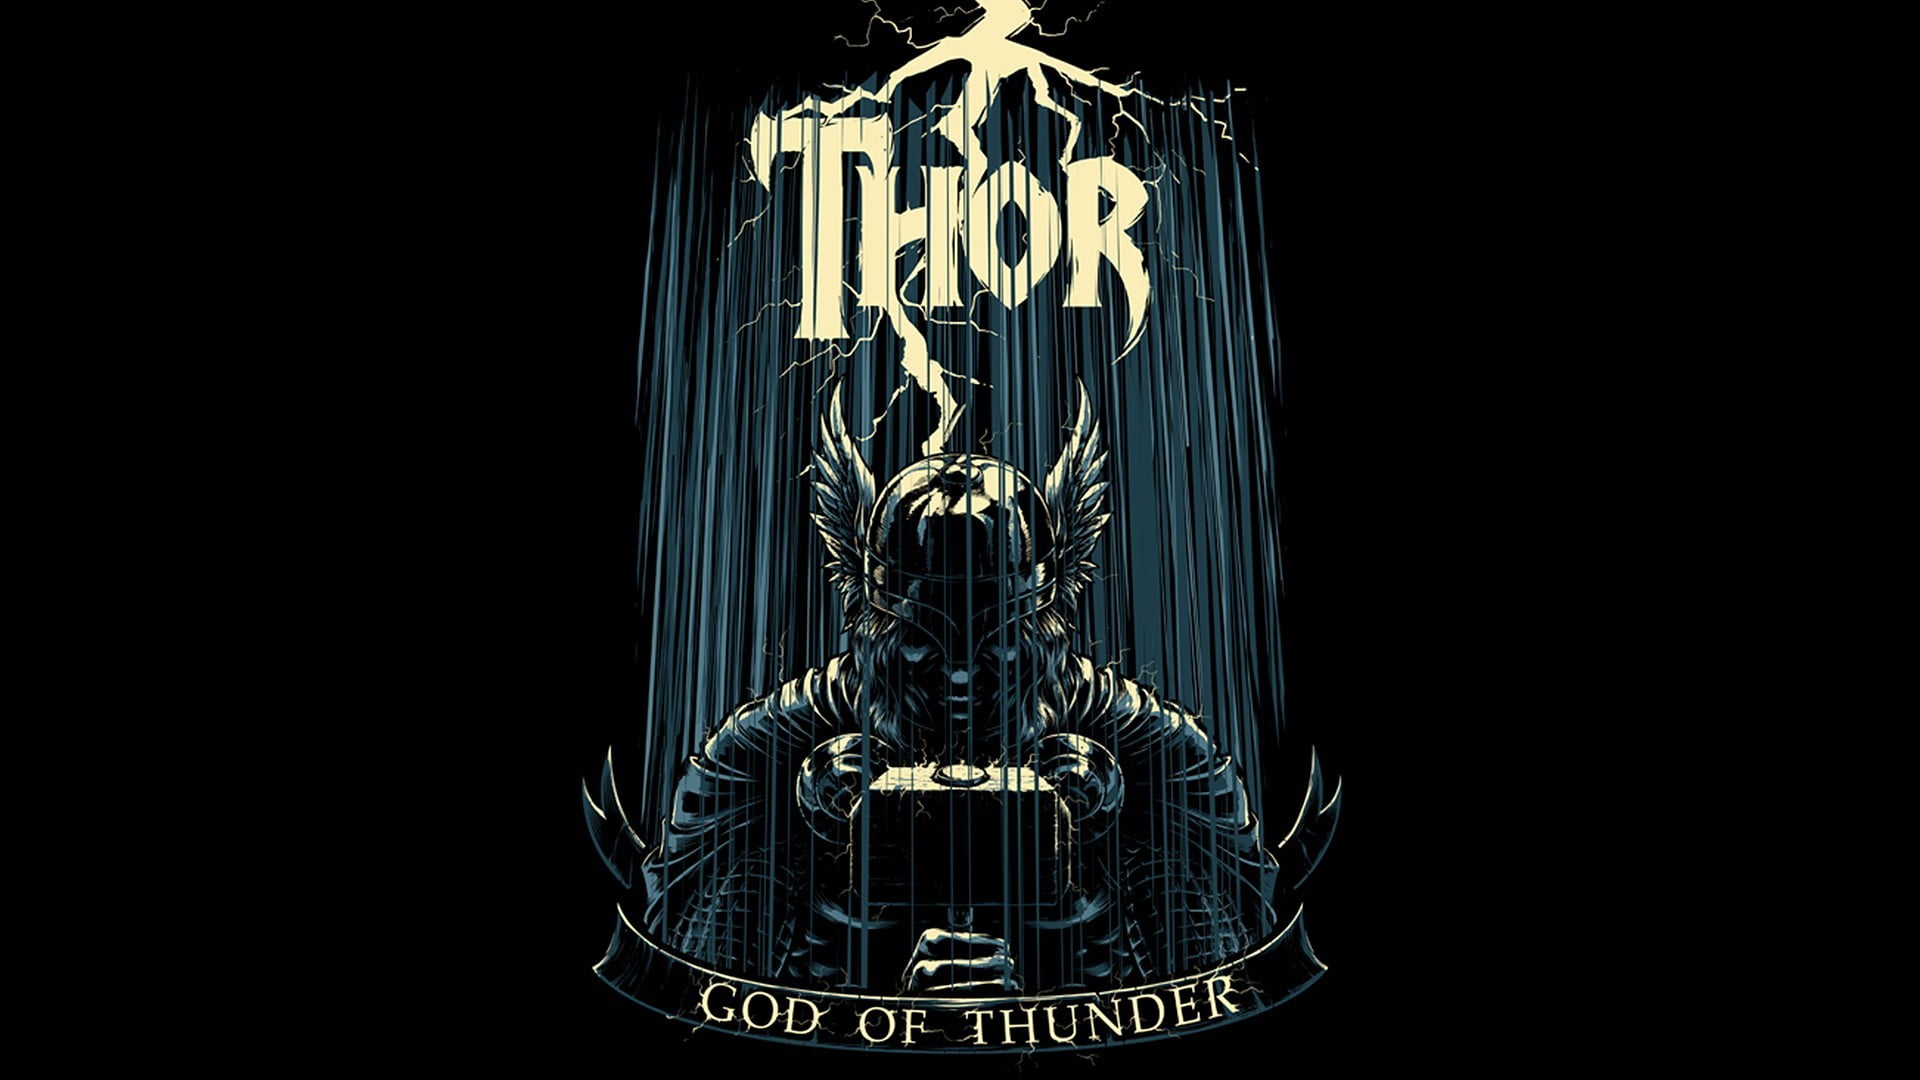 Wallpaper Thor Marvel Cinematic Universe Thor Love and Thunder Poster  Gorr The God Butcher Jane Foster Background  Download Free Image